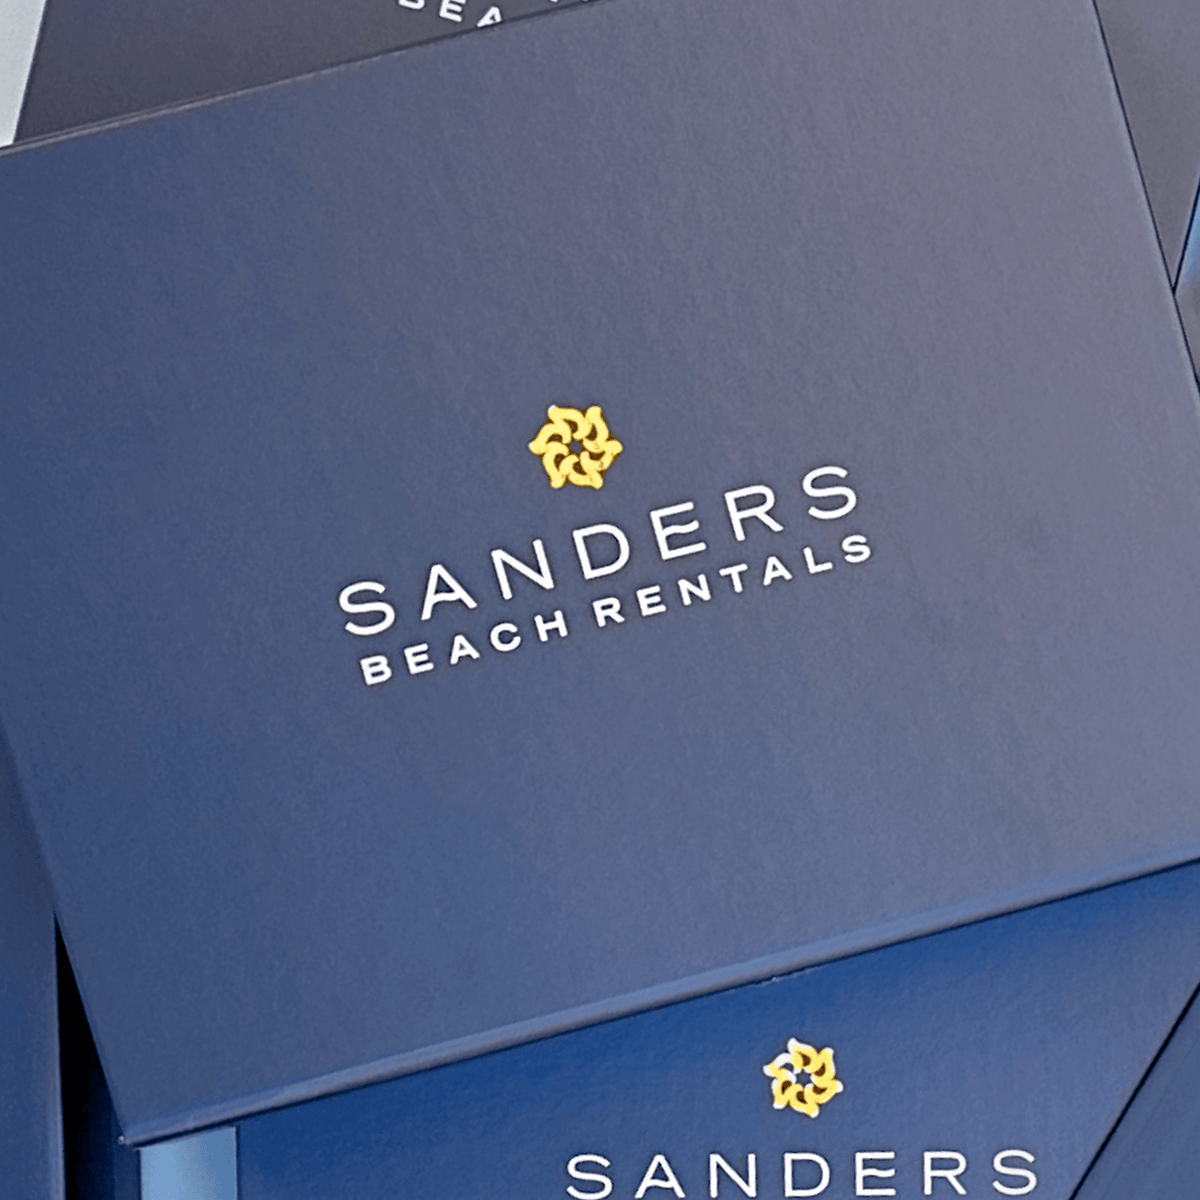 Navy Blue A5 Deep Magnetic Gift Boxes